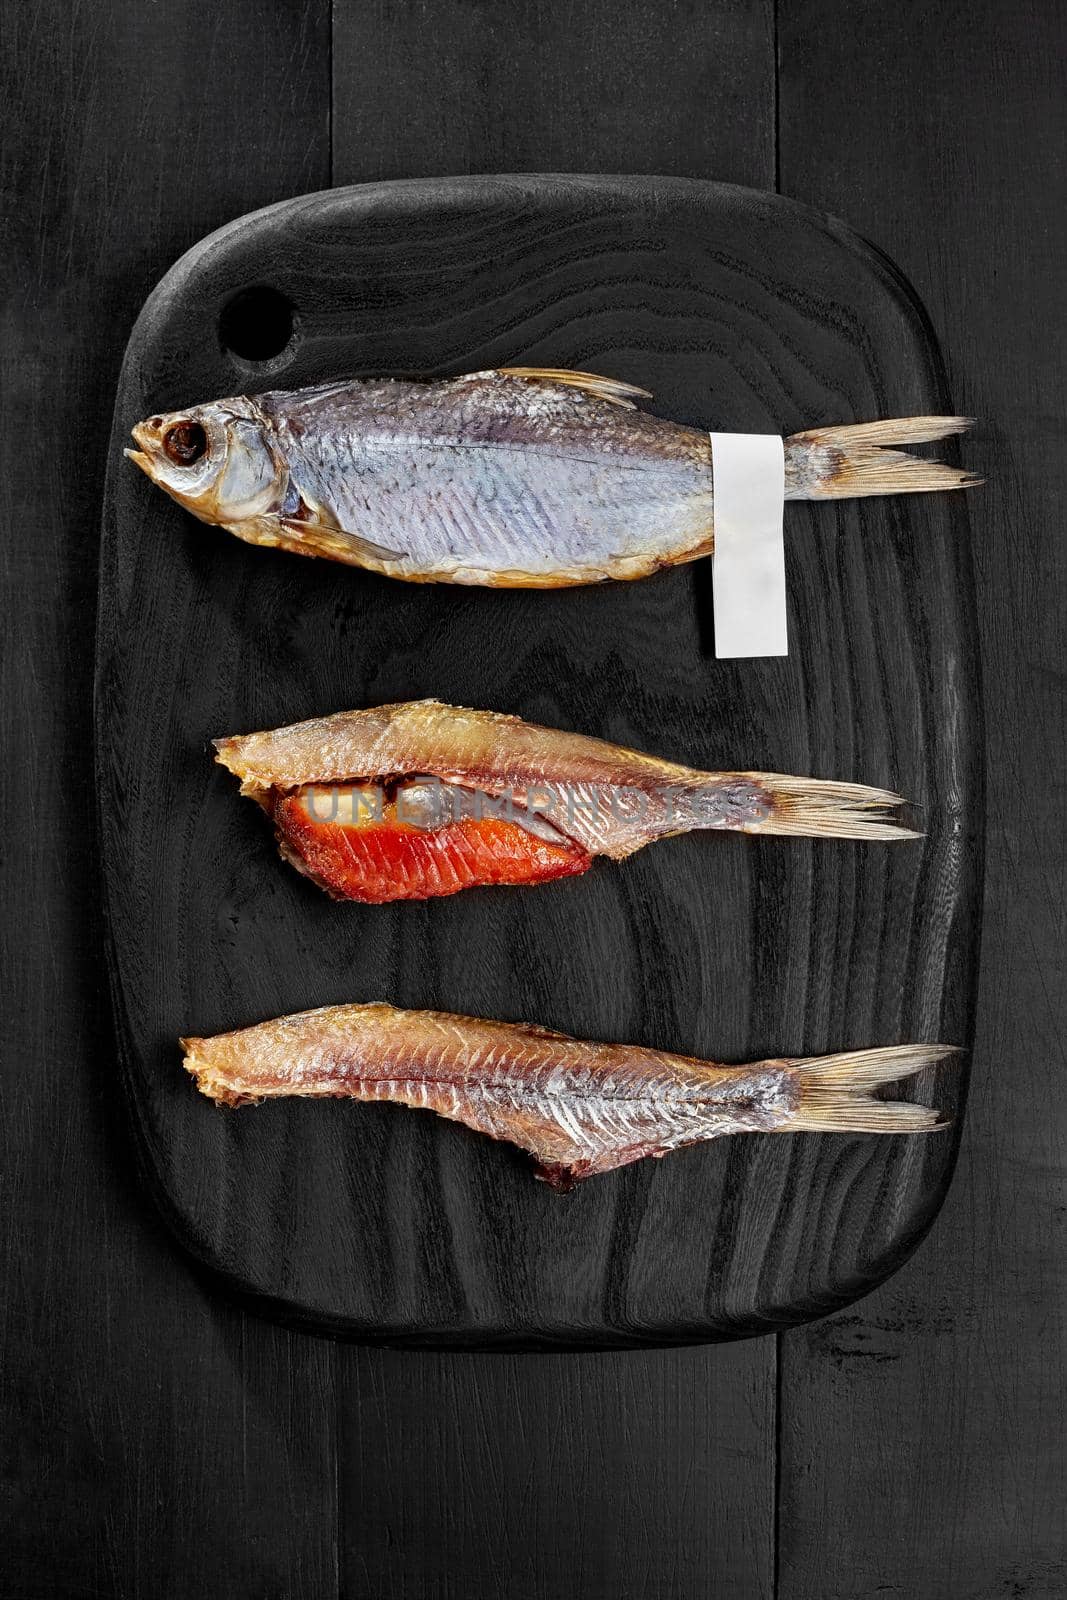 Whole salted air-dried roach fish with label on tail and two peeled fish with caviar served on black wooden board. Popular savory snack